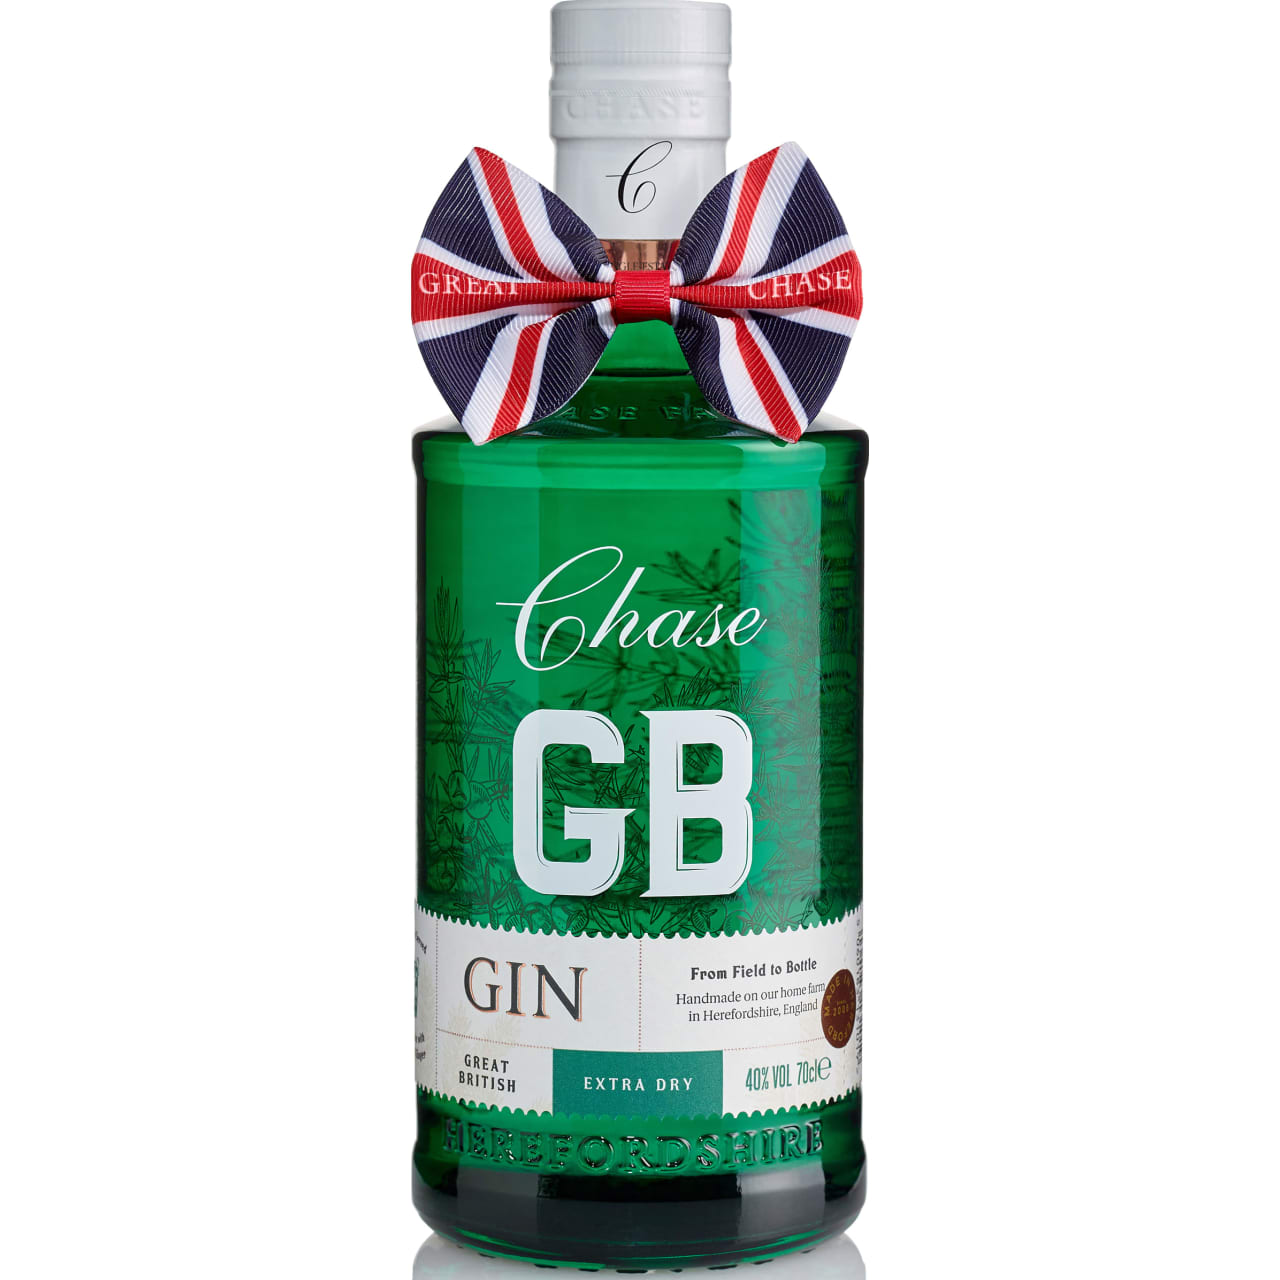 A premium gin from the Chase distillery. Heavily juniper led in taste, this gin is an extra dry style.